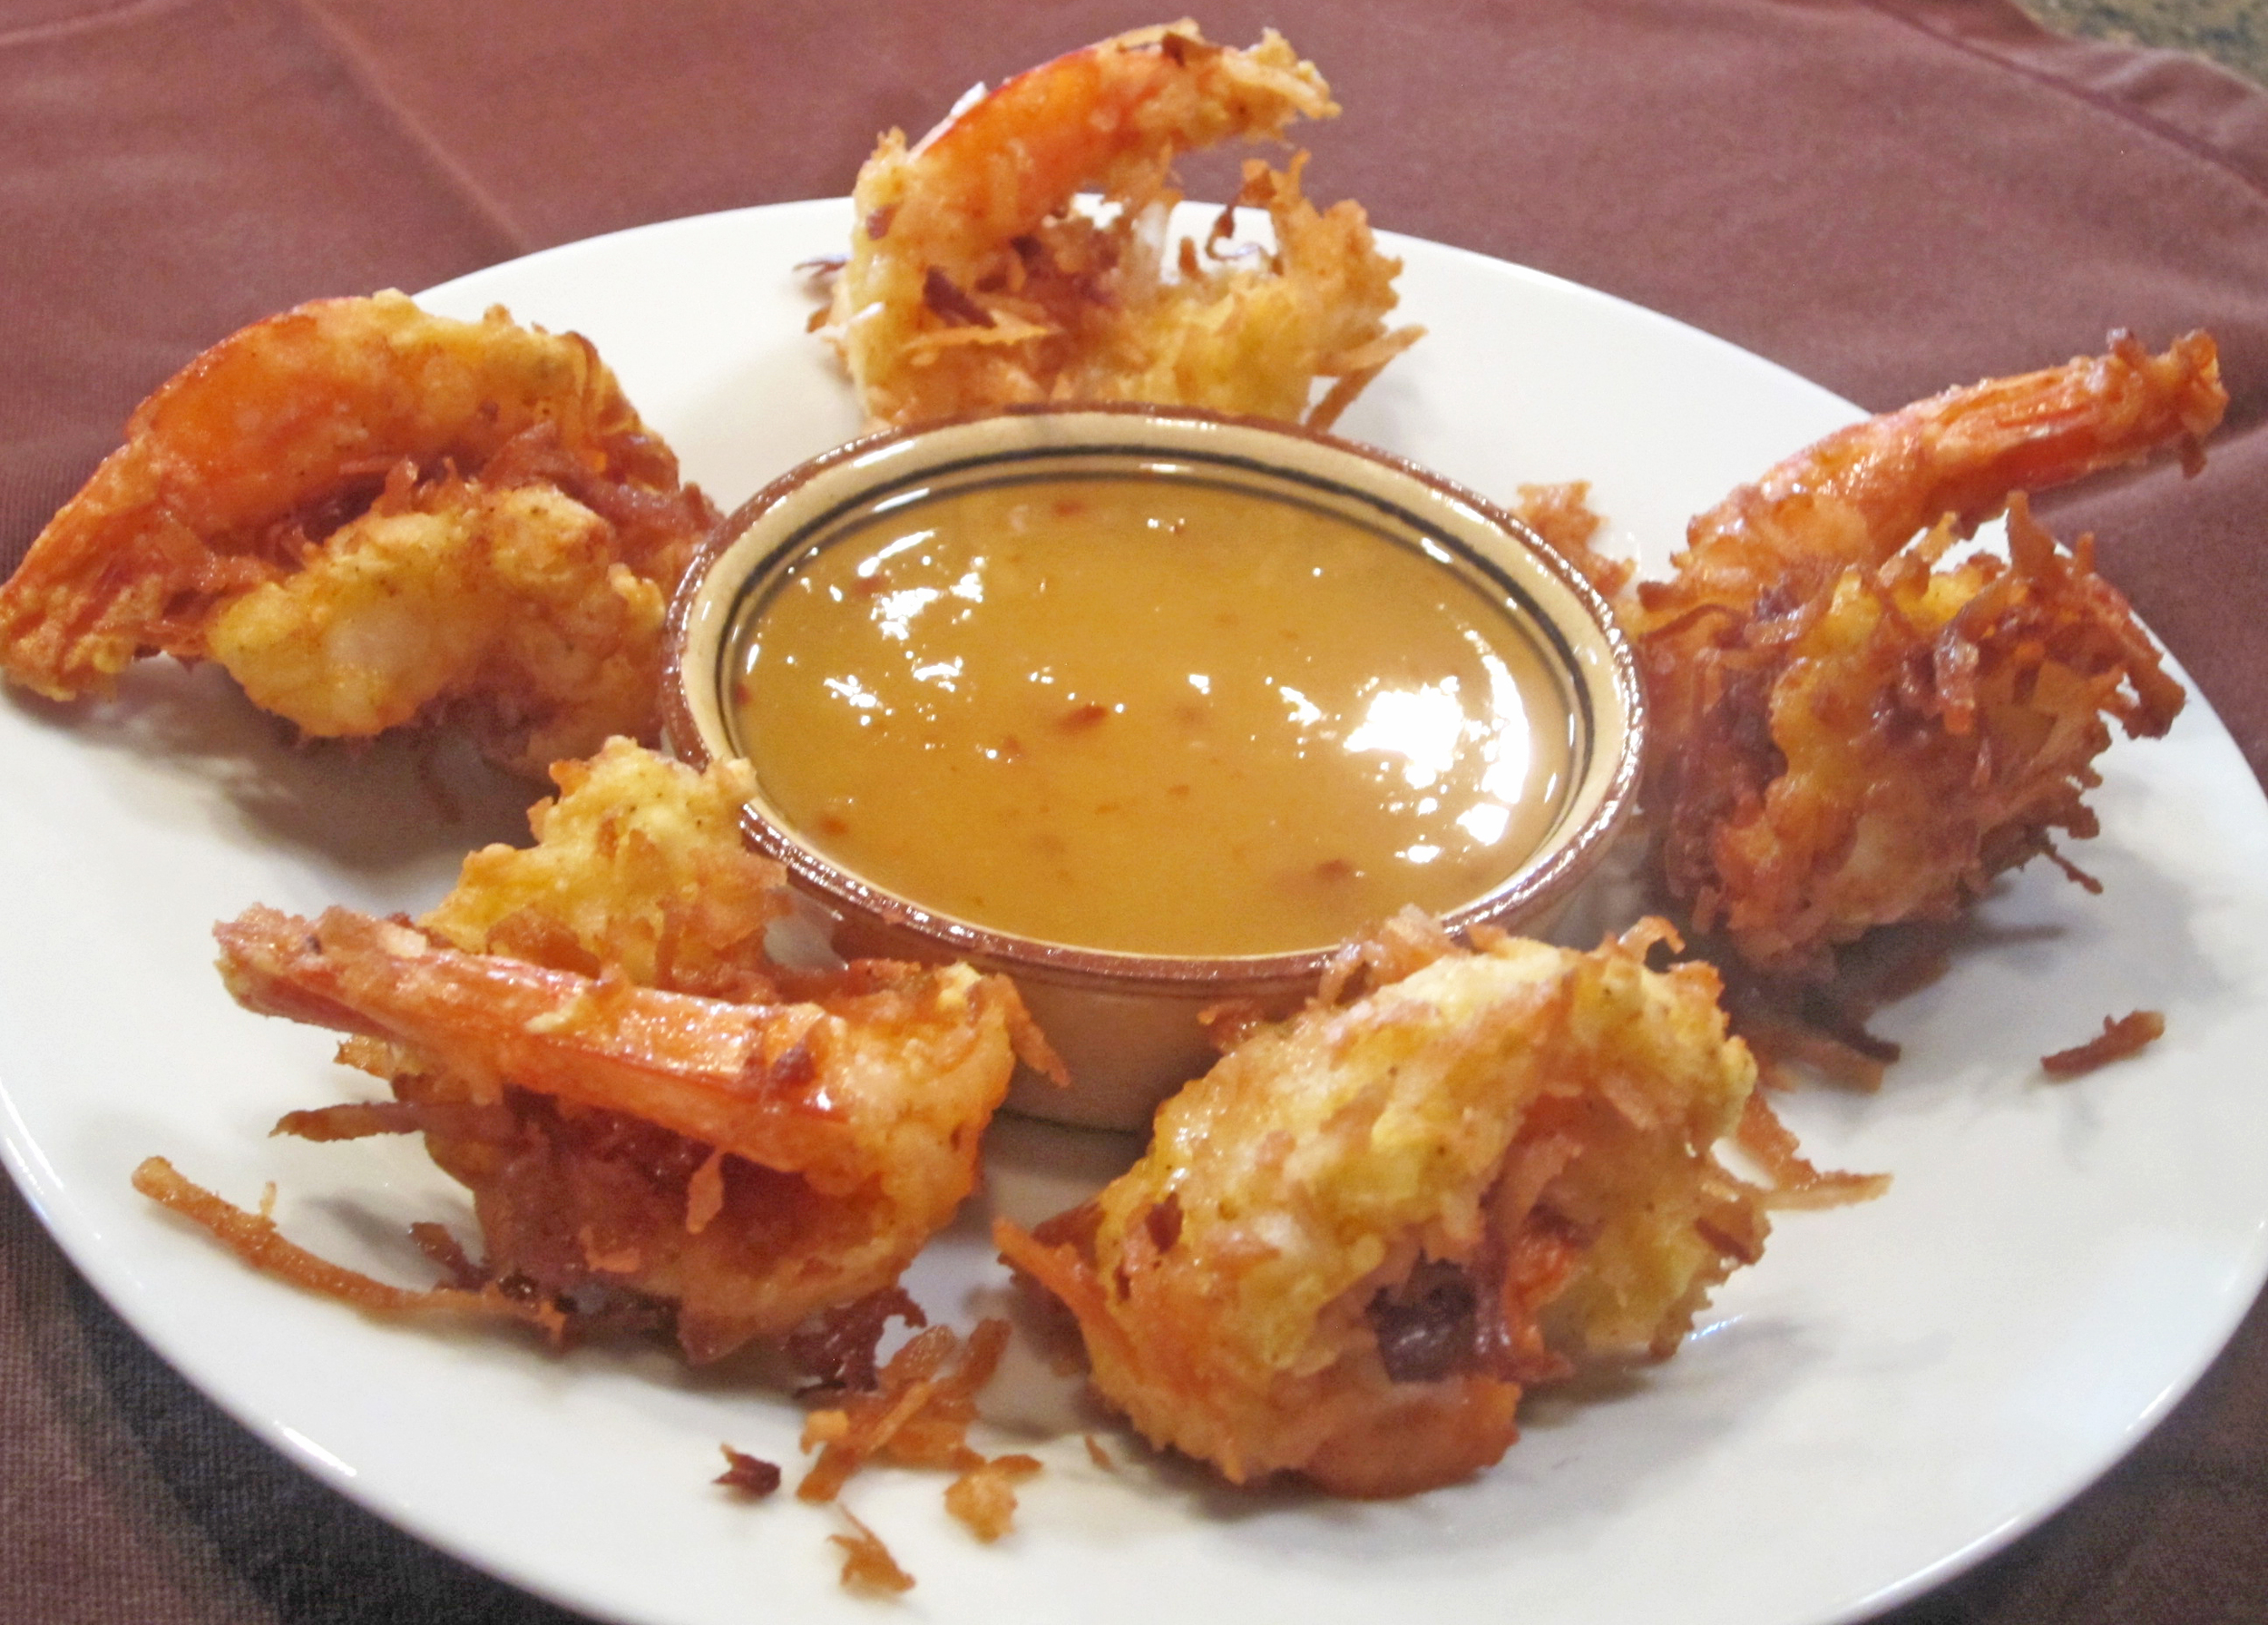  Coconut Shrimp with Pineapple Chili Sauce. 